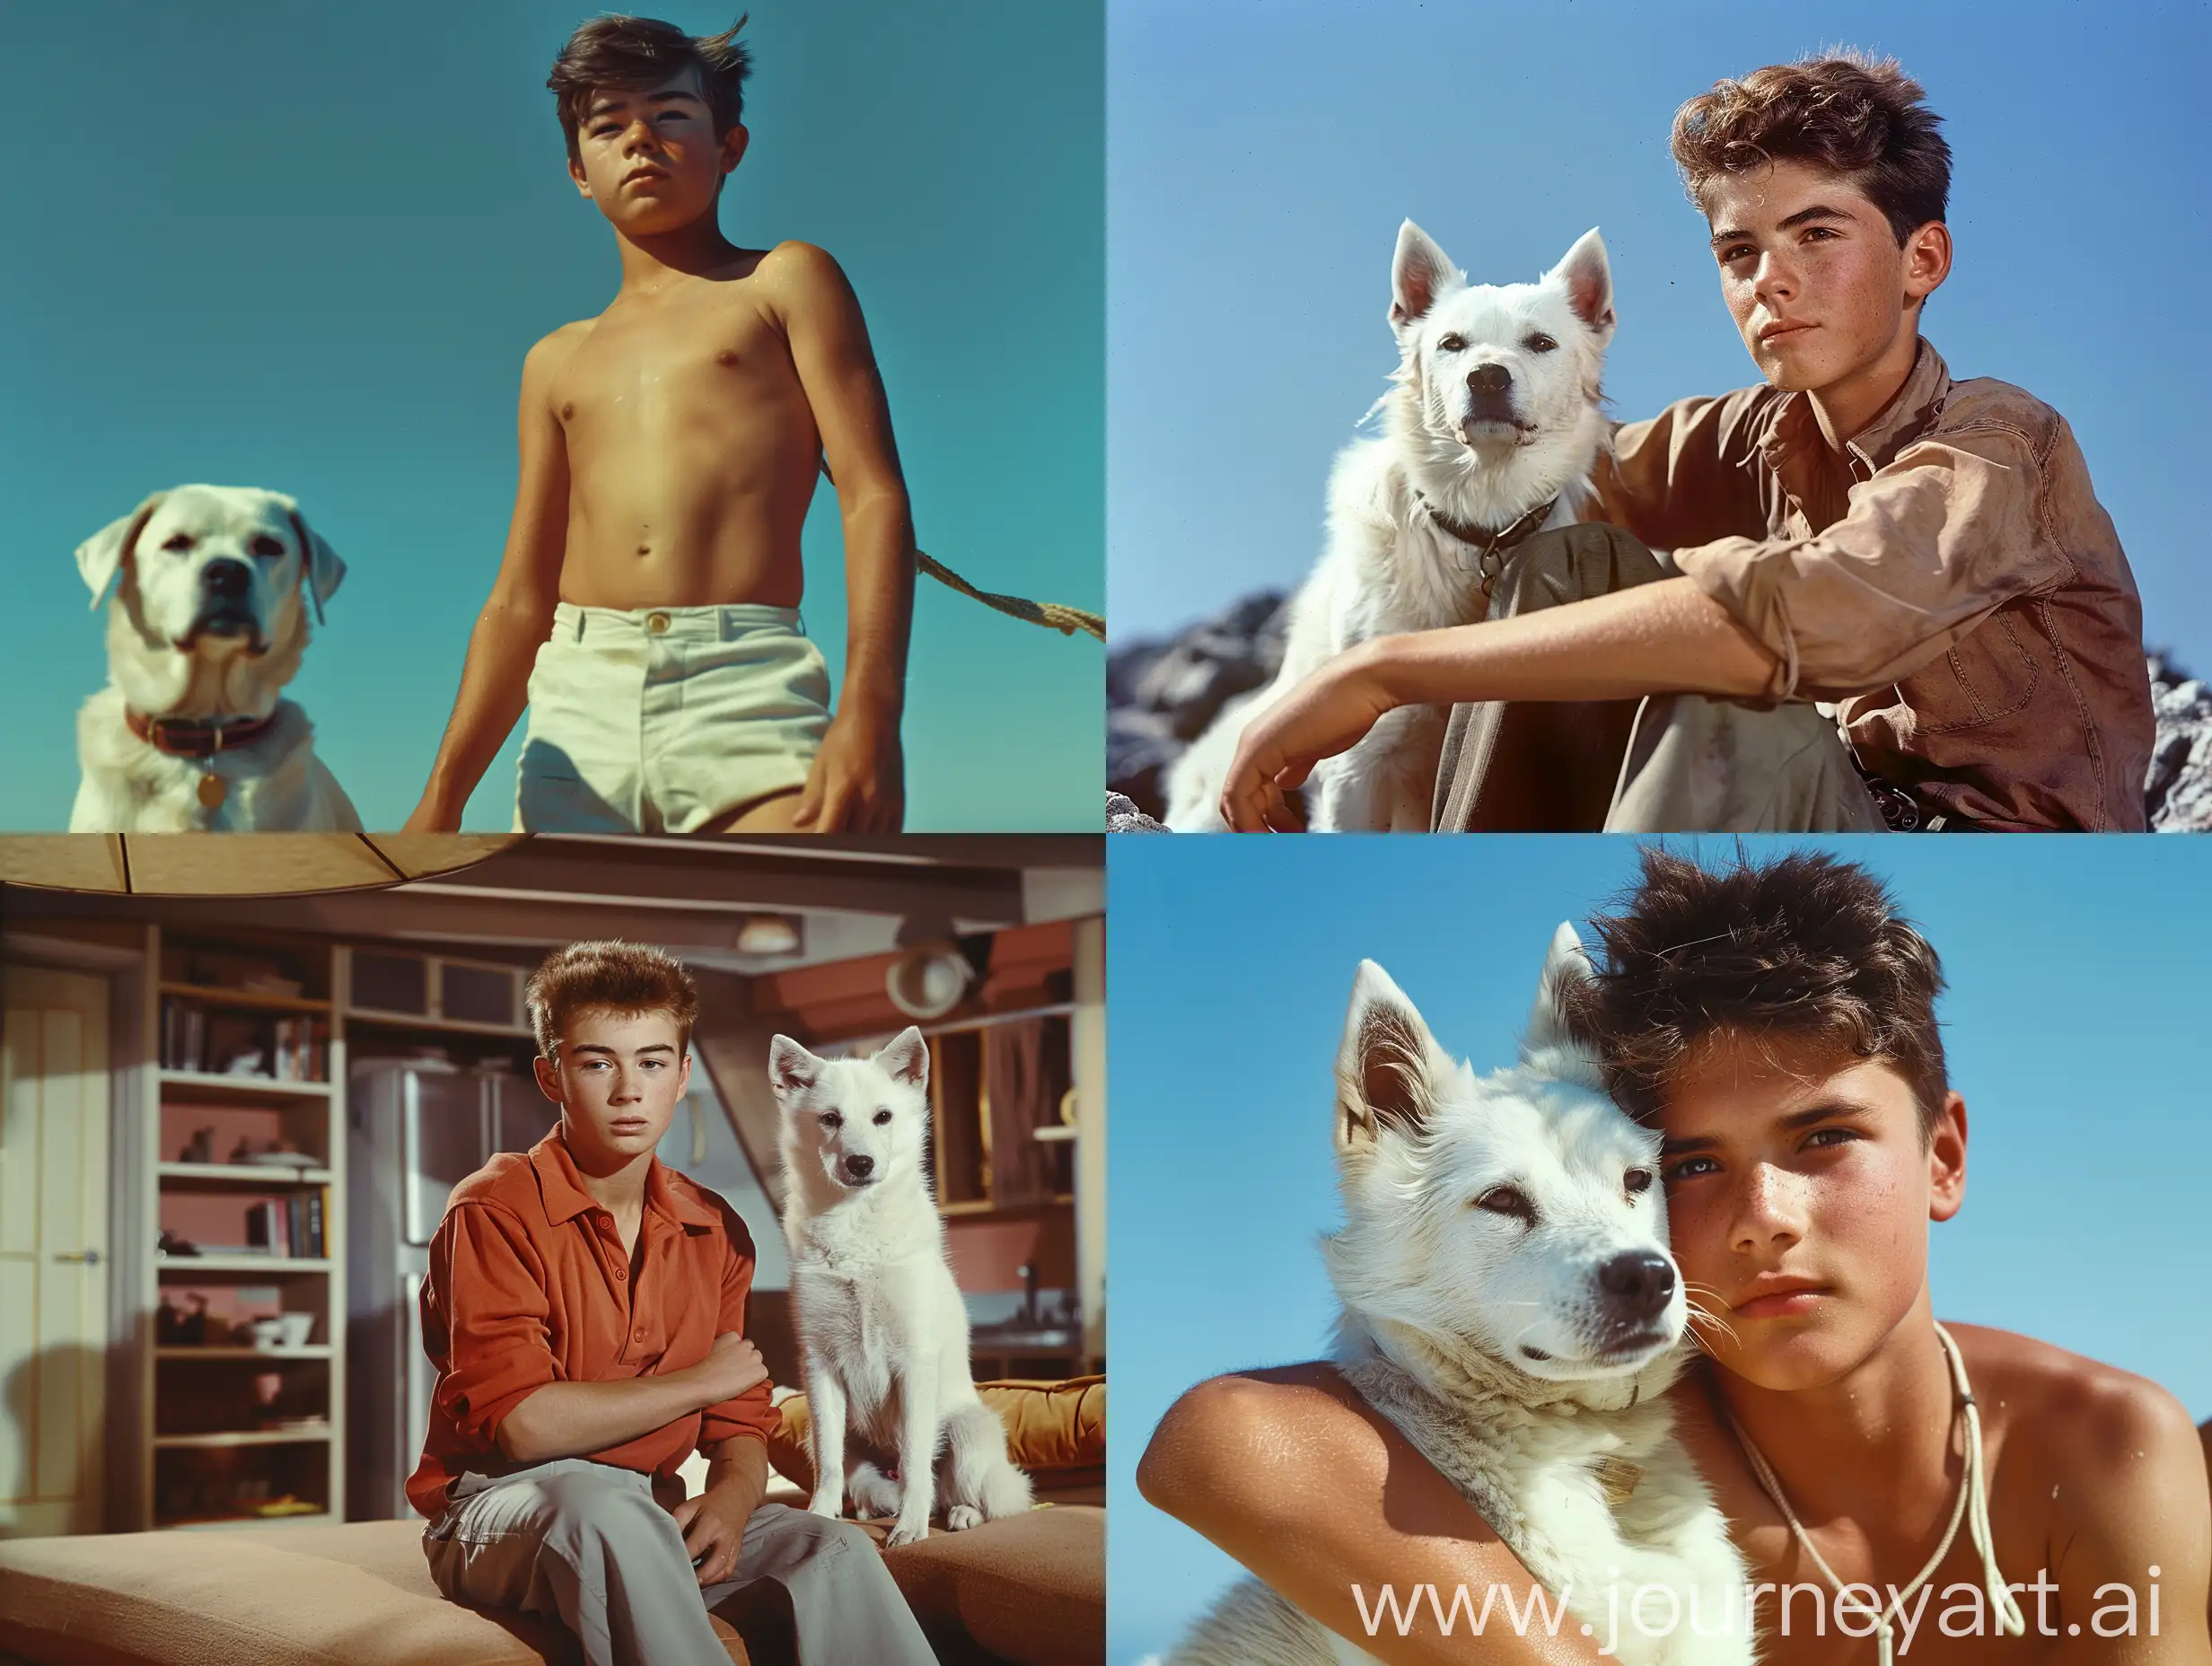 Teenage-Titan-with-White-Dog-in-Realistic-1950s-Superpanavision-Color-Image